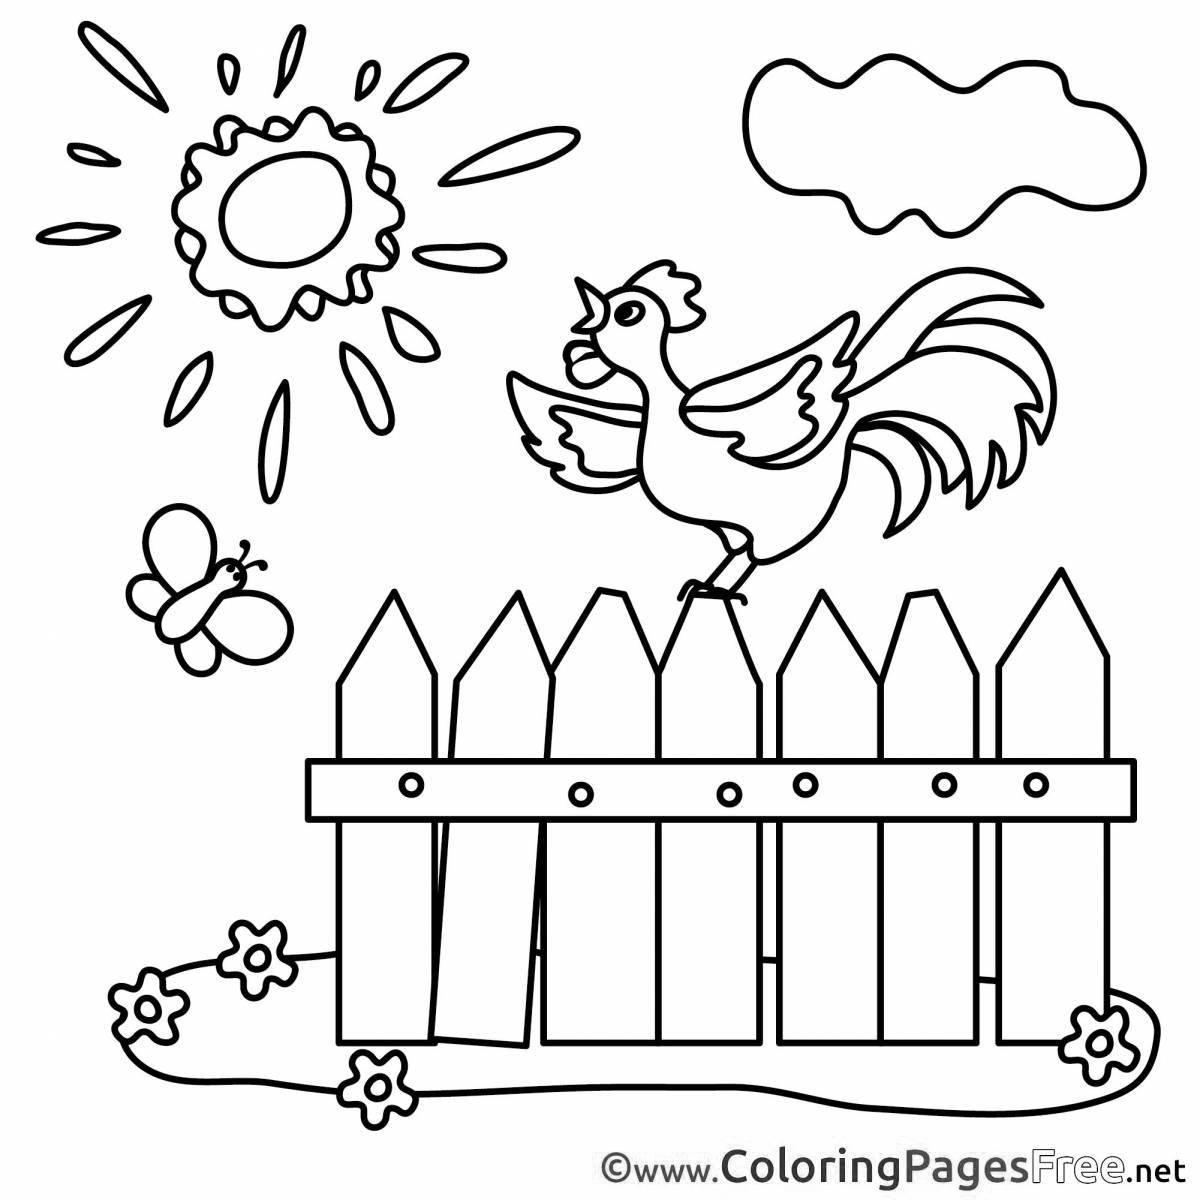 Fancy fence coloring page